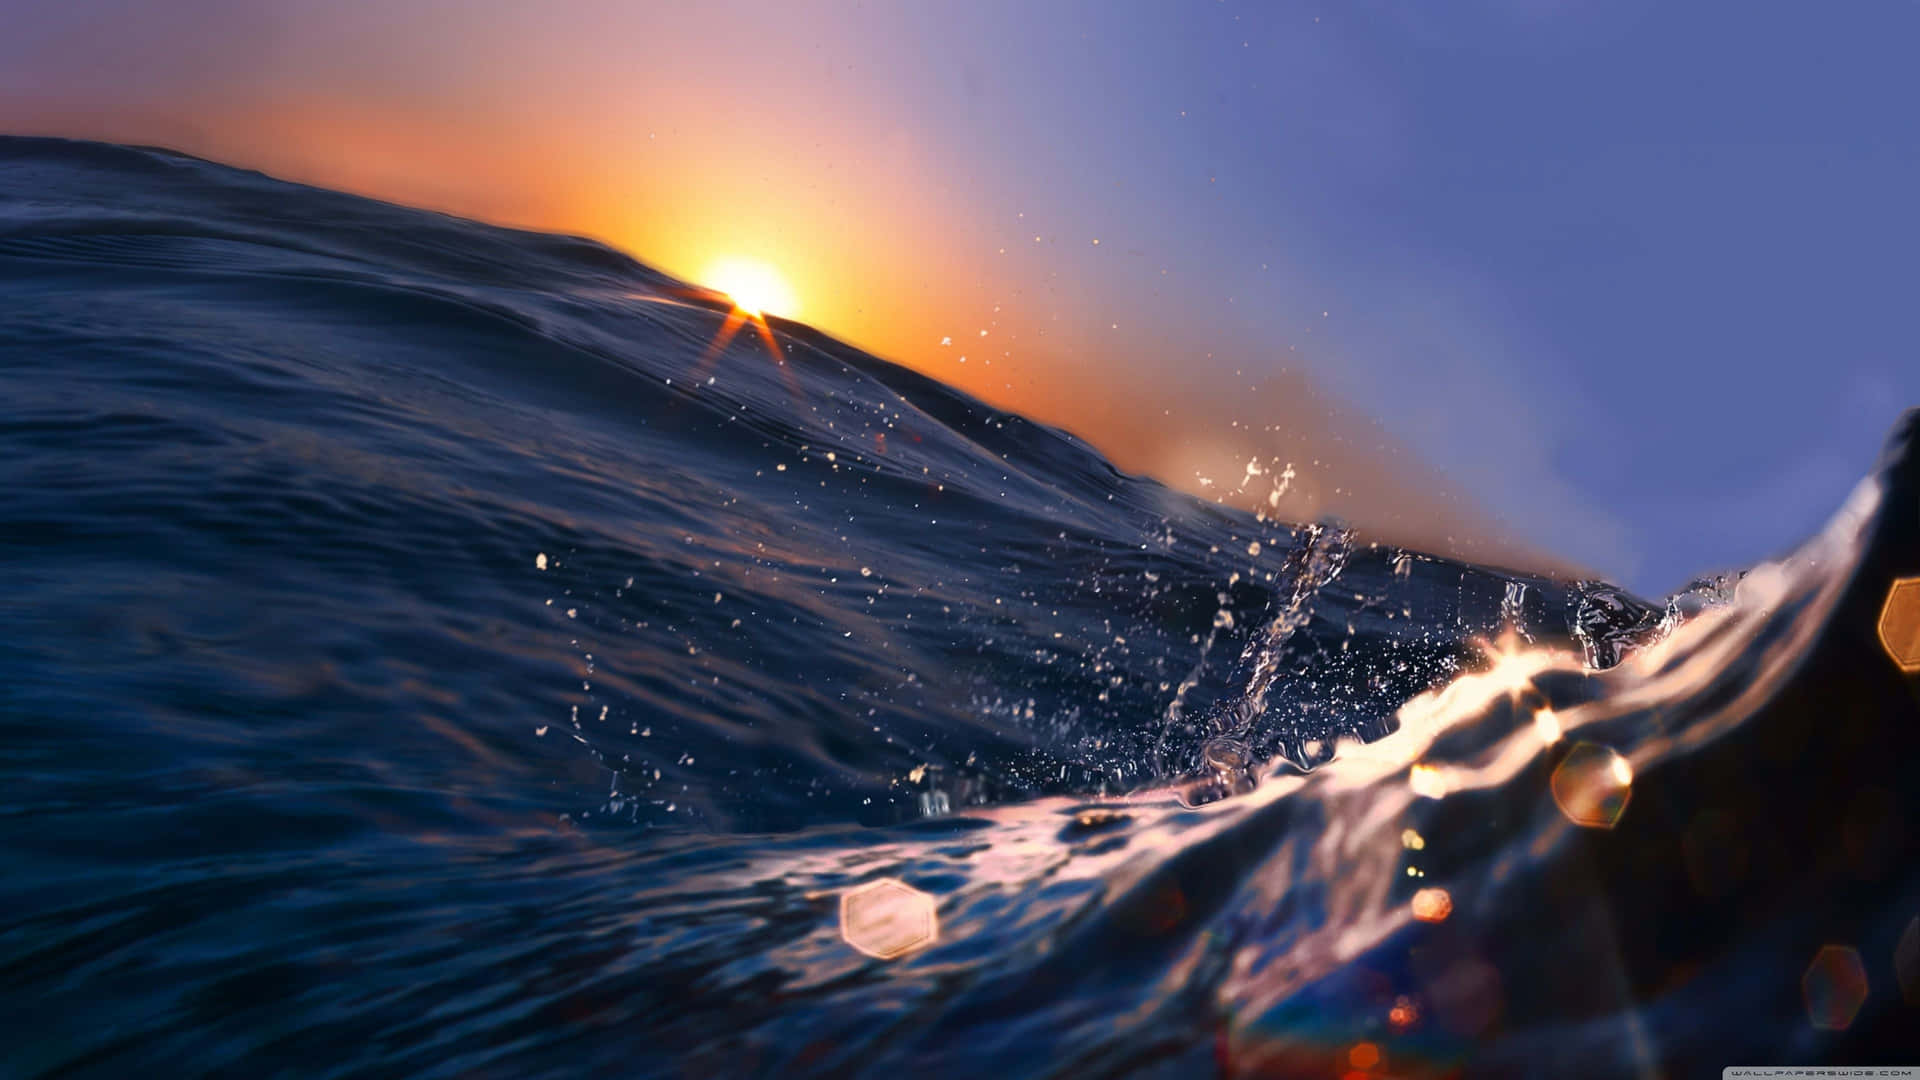 A Sunset Over The Ocean With Waves Wallpaper